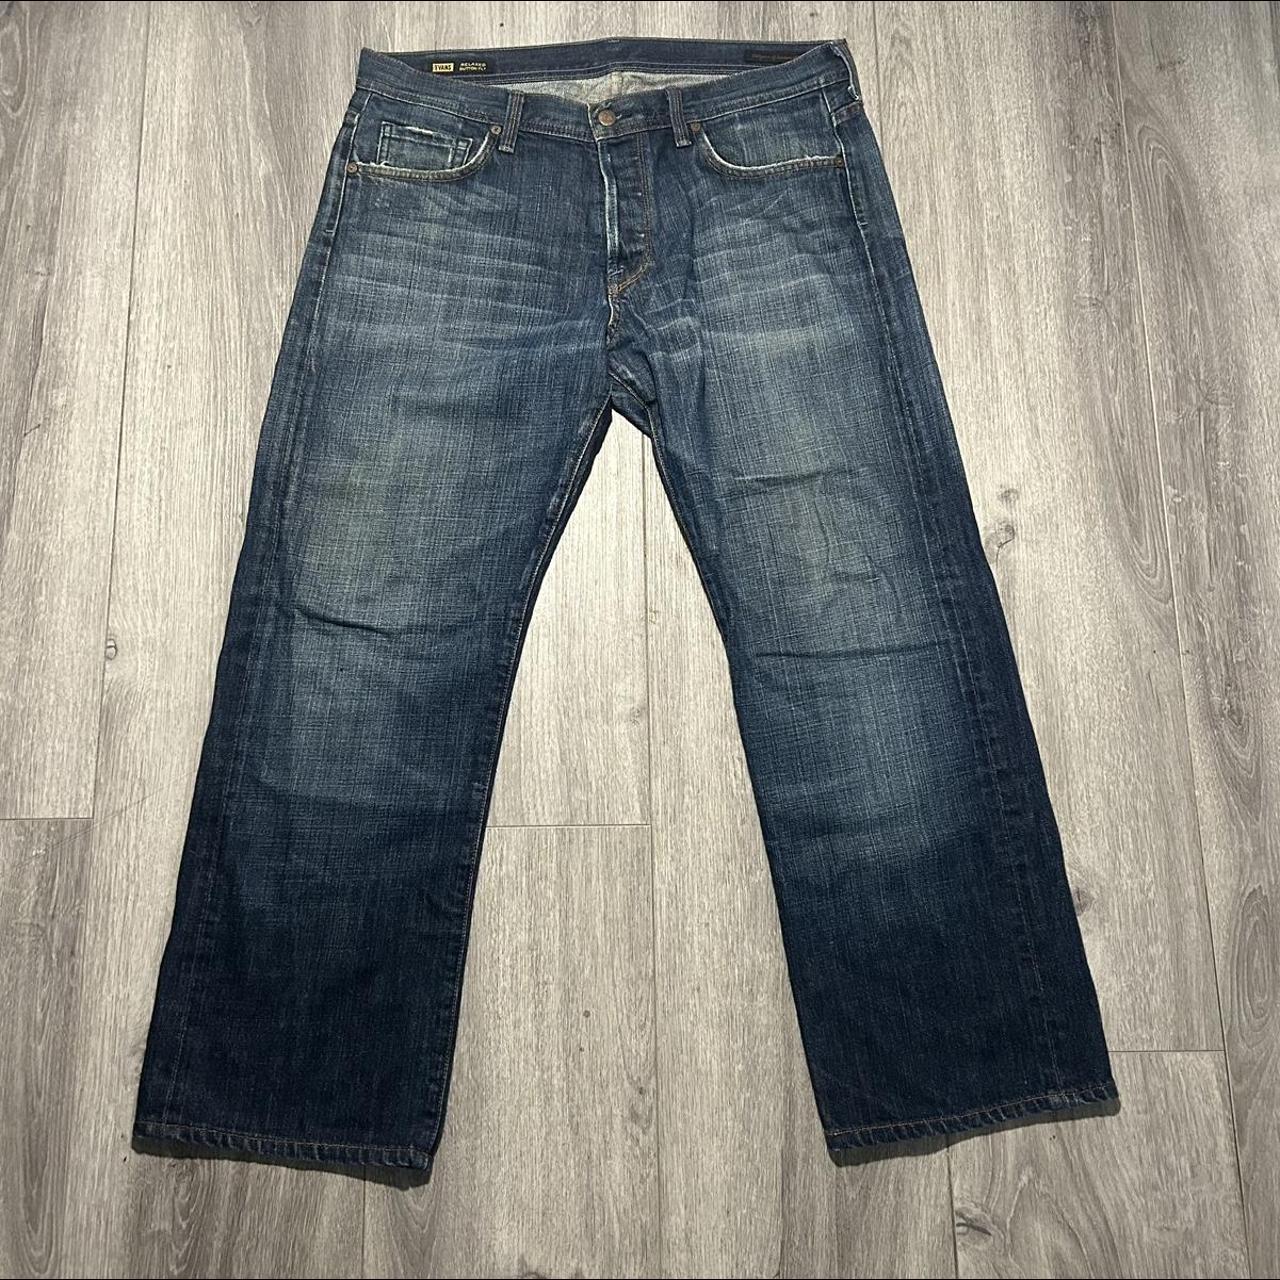 Evans Relaxed Button Fly Jeans 34x30 Relaxed fit... - Depop